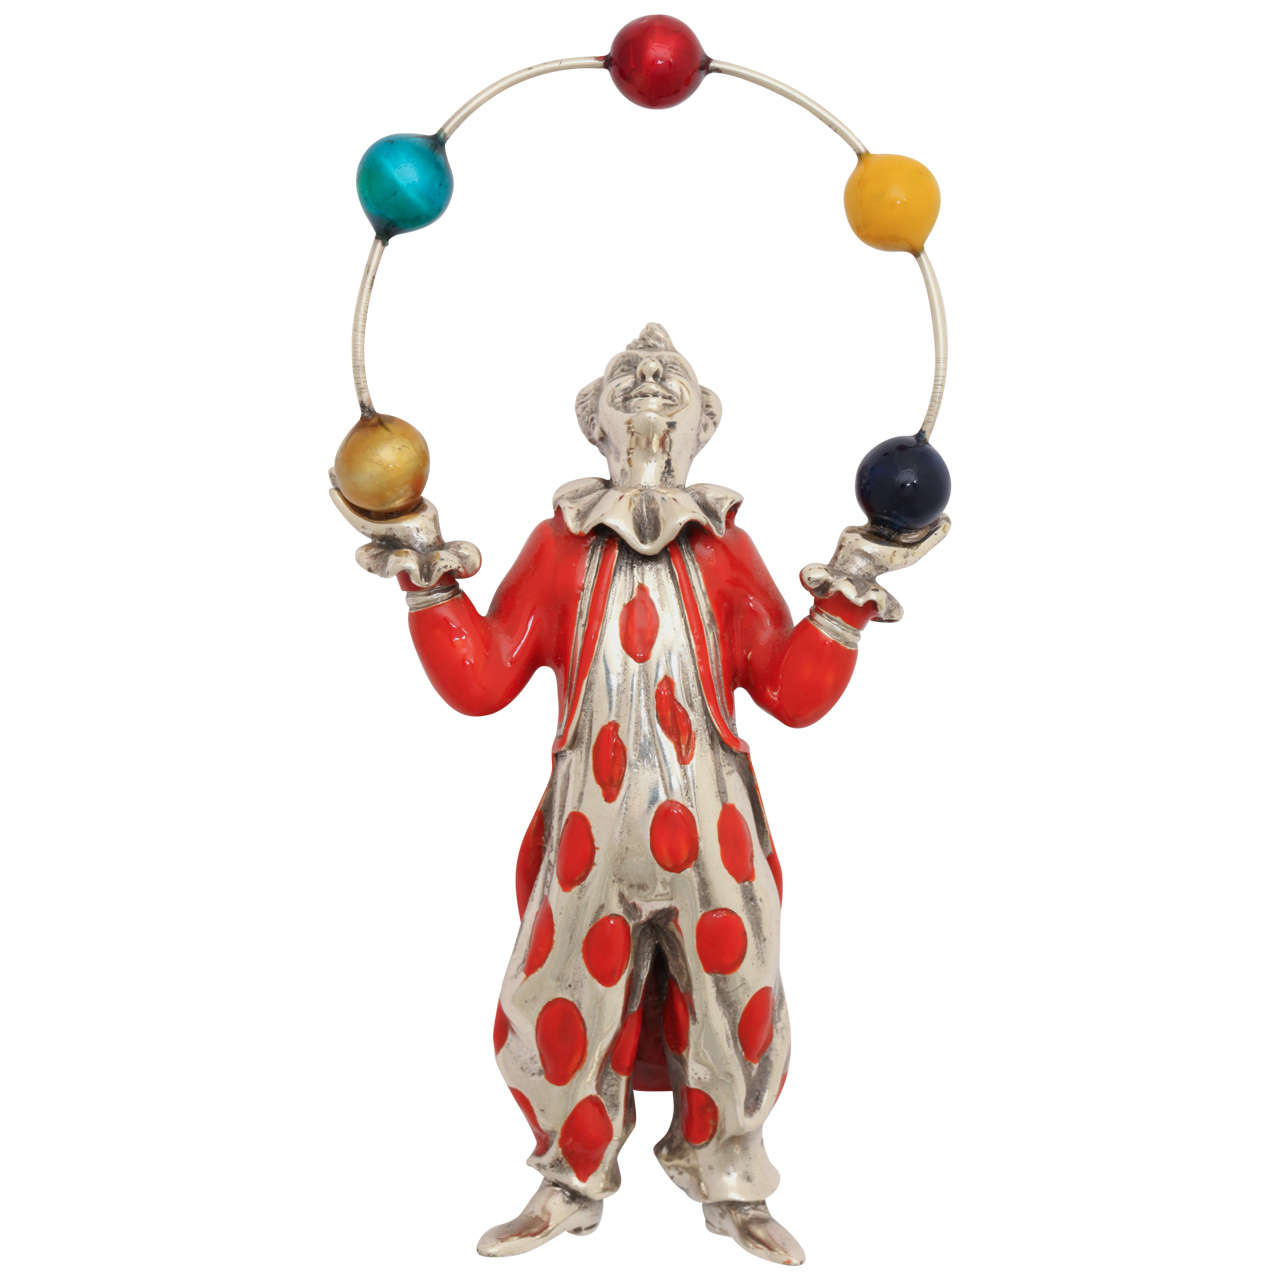 1960s Polychromed Juggler Figurine Created by Gene Moore for Tiffany & Co. For Sale